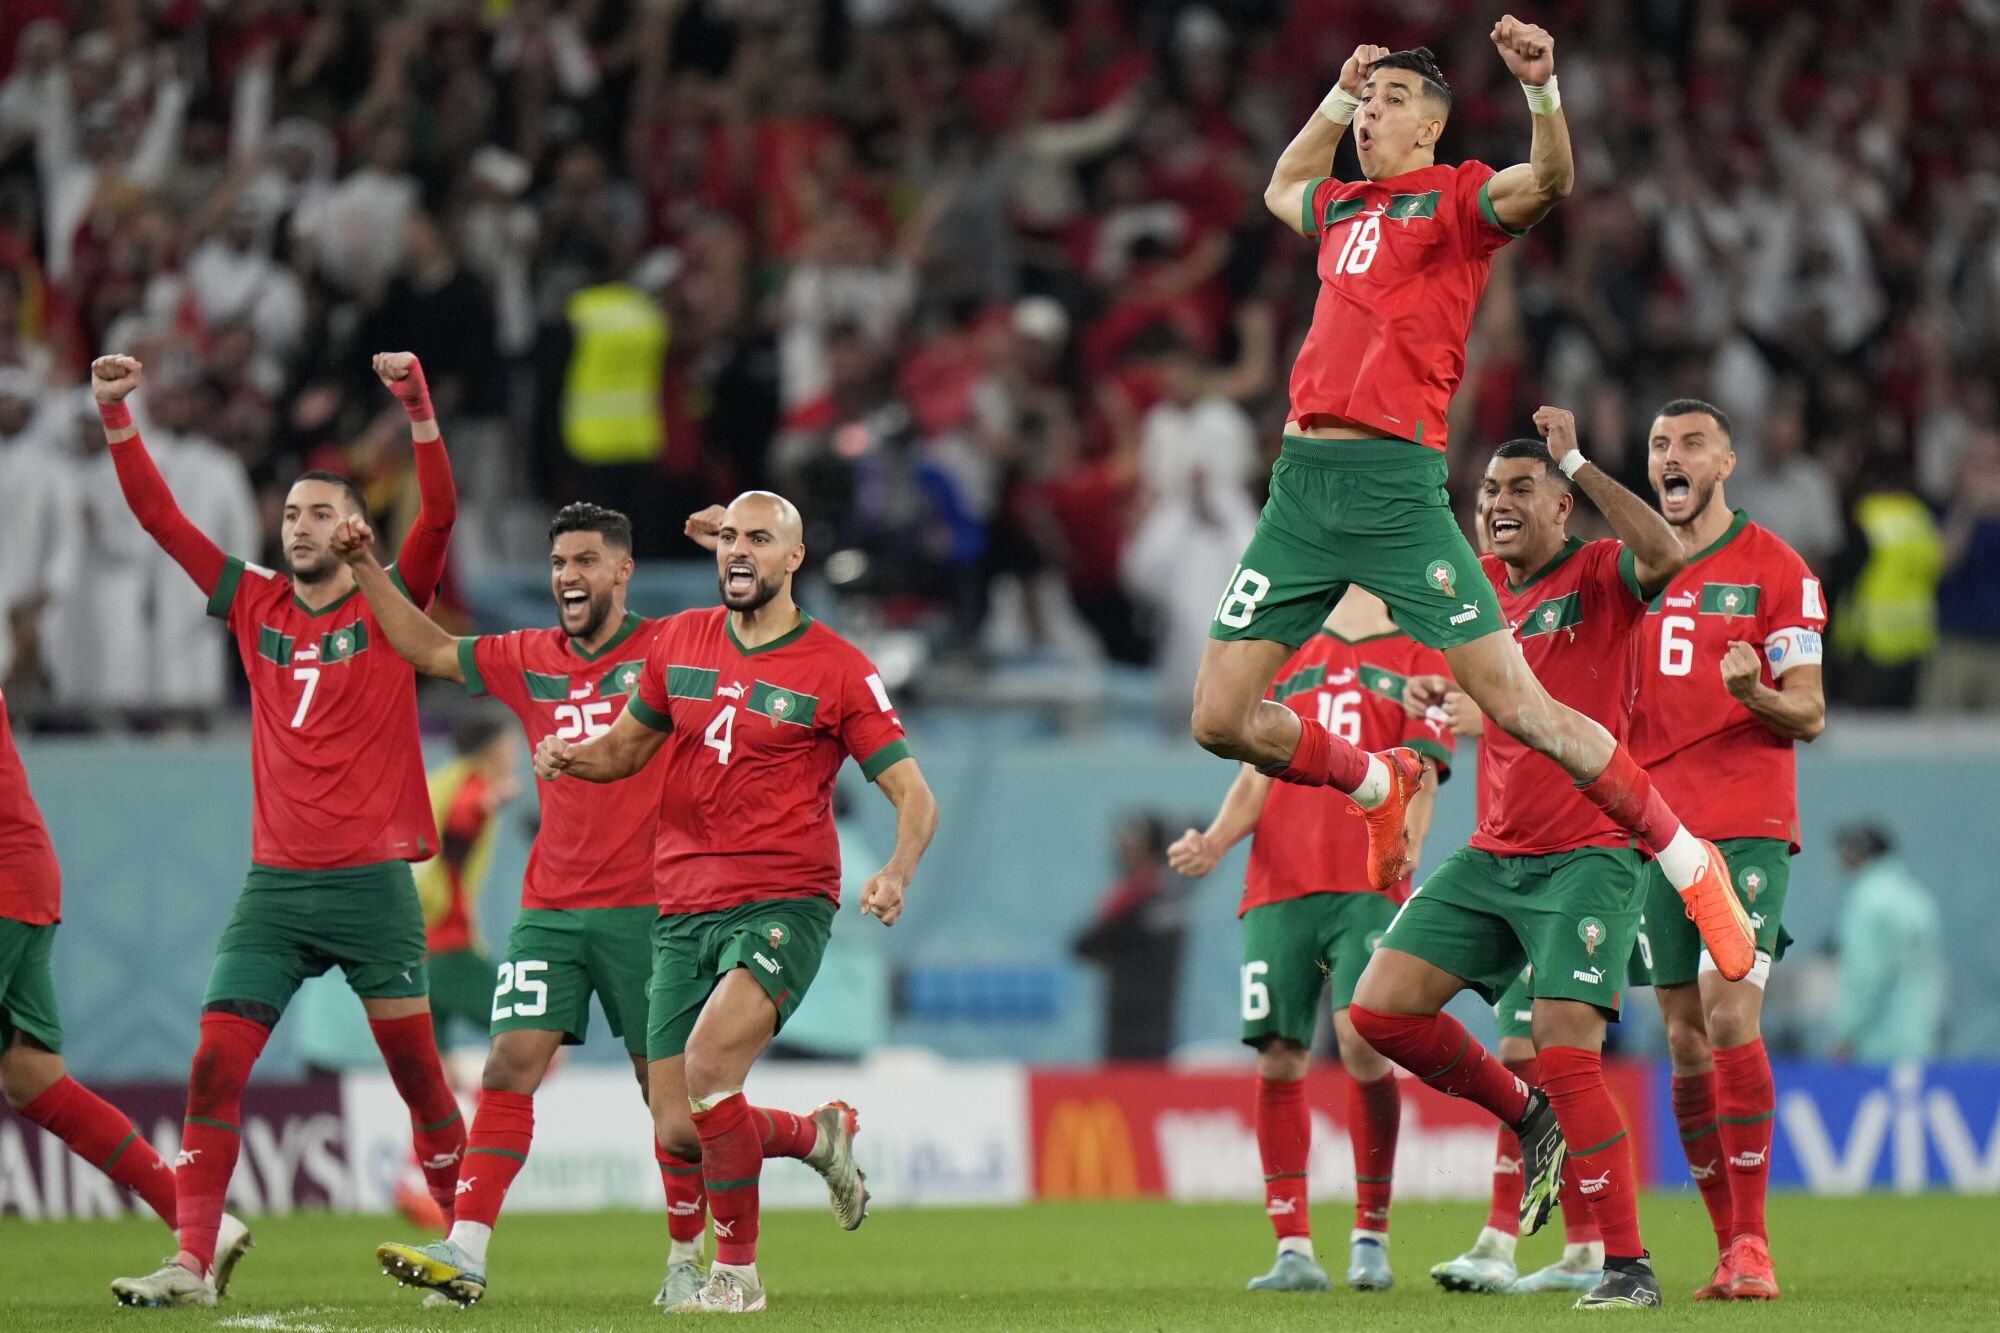 Jawad El Yamiq, top right, rejoices with teammates after Morocco defeated Spain via penalty shootout at the World Cup.